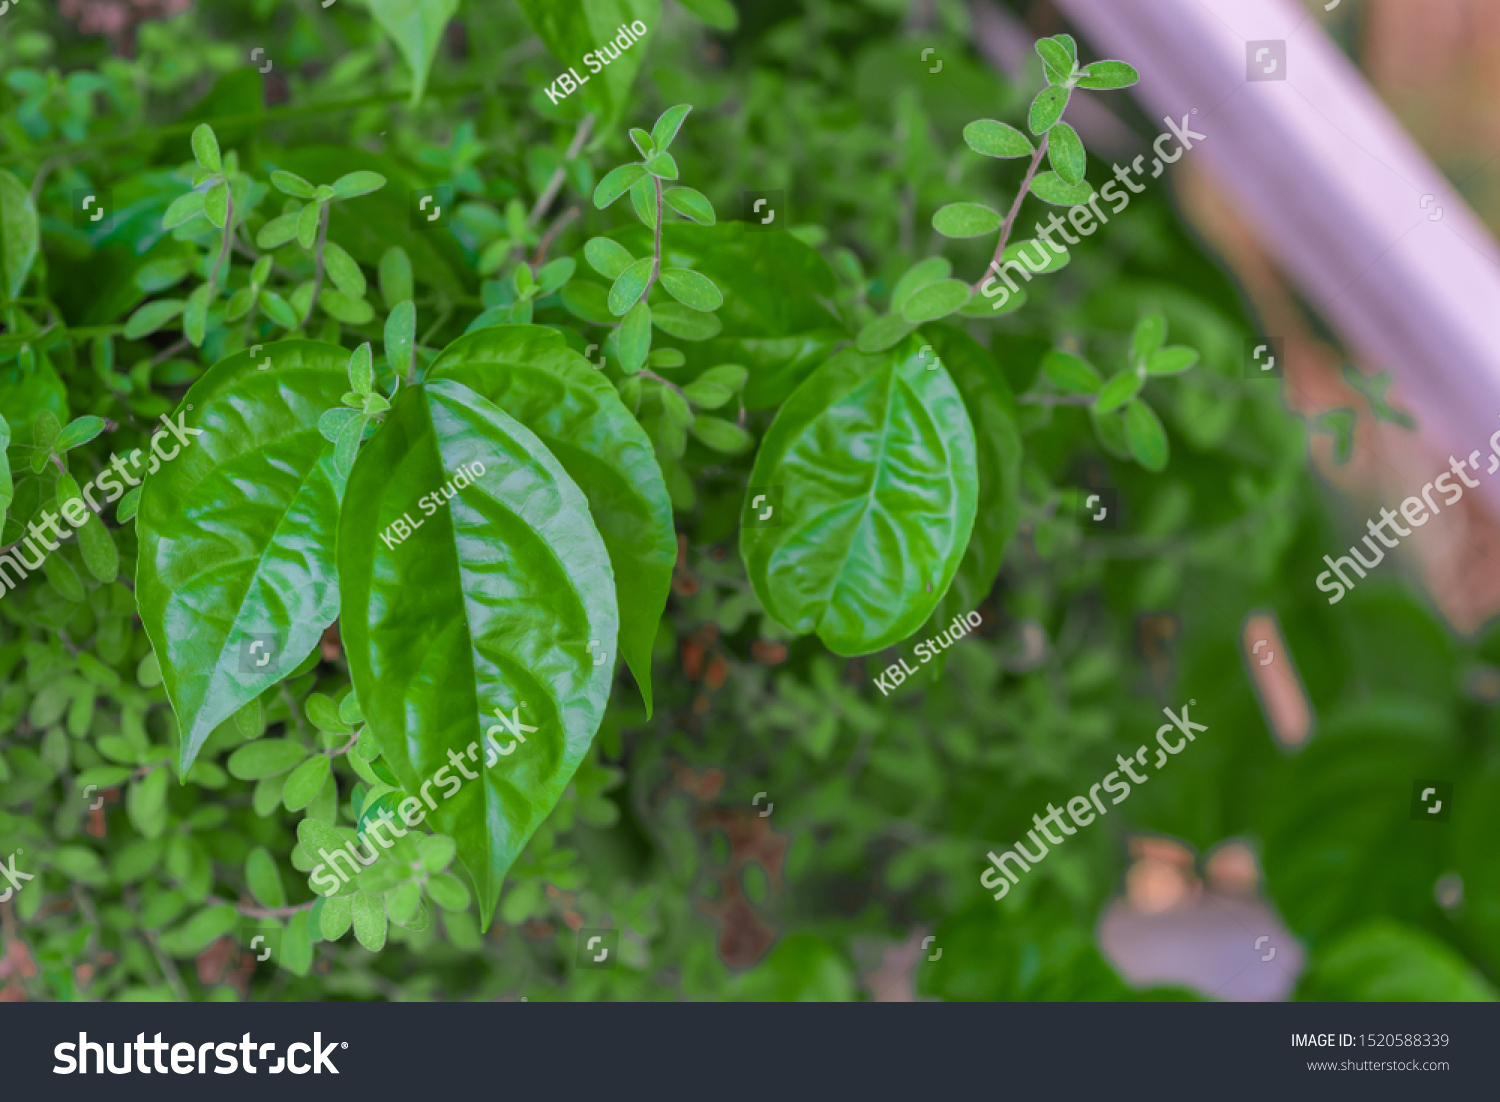 Beautiful green leaves natural leaves natural beauty #1520588339